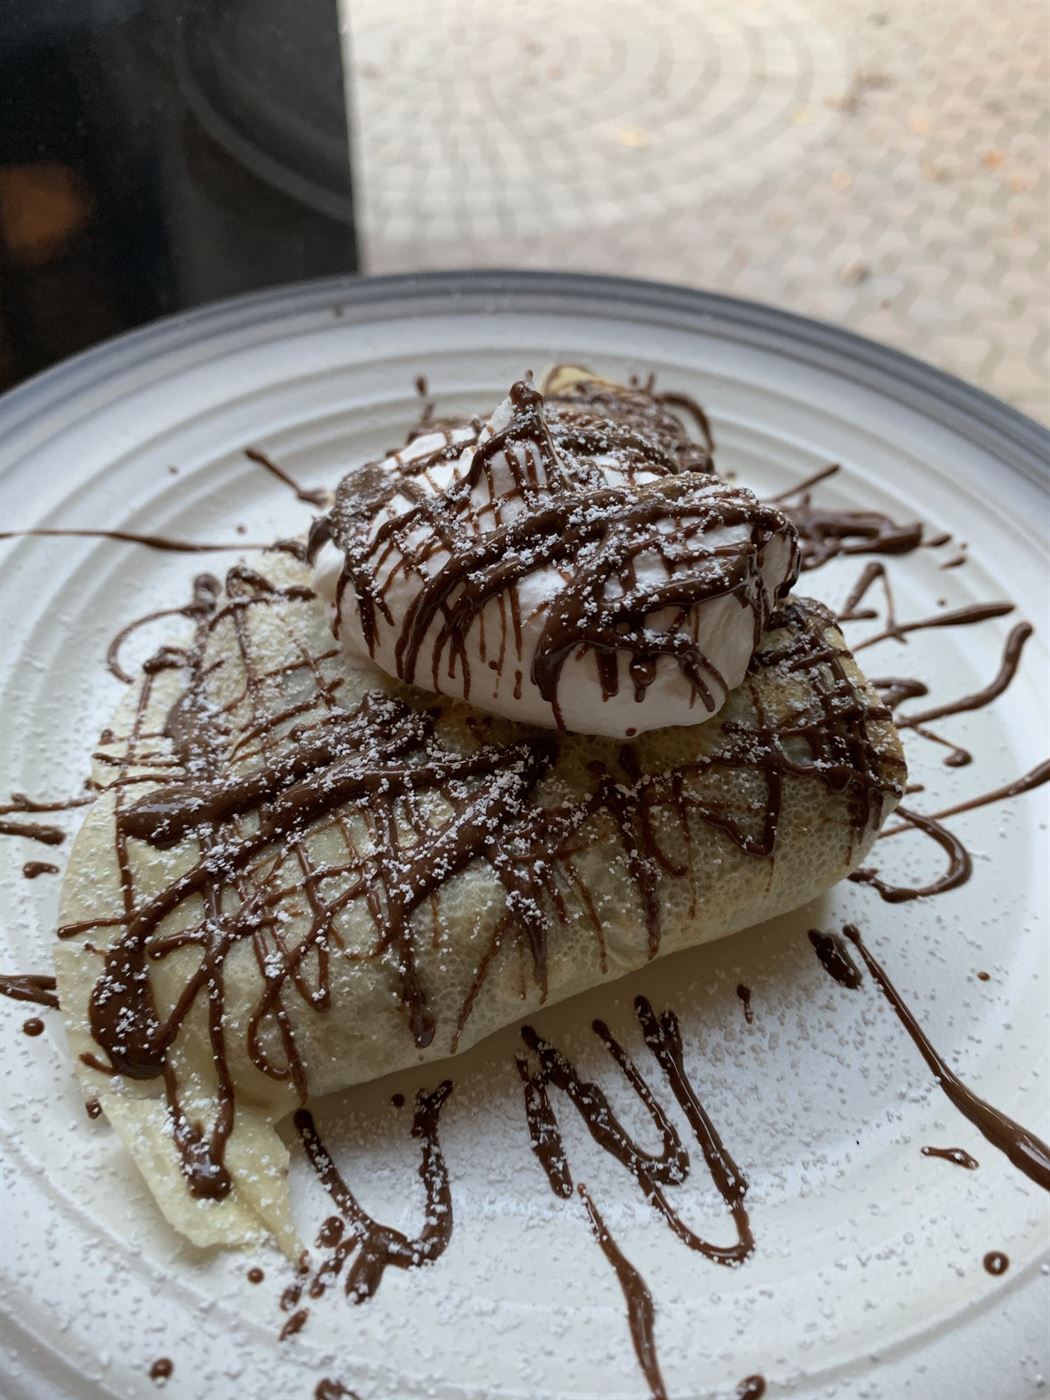 You can top your crepes however you want or devour them immediately; the choice is yours. Samantha Bailey | The Montclarion